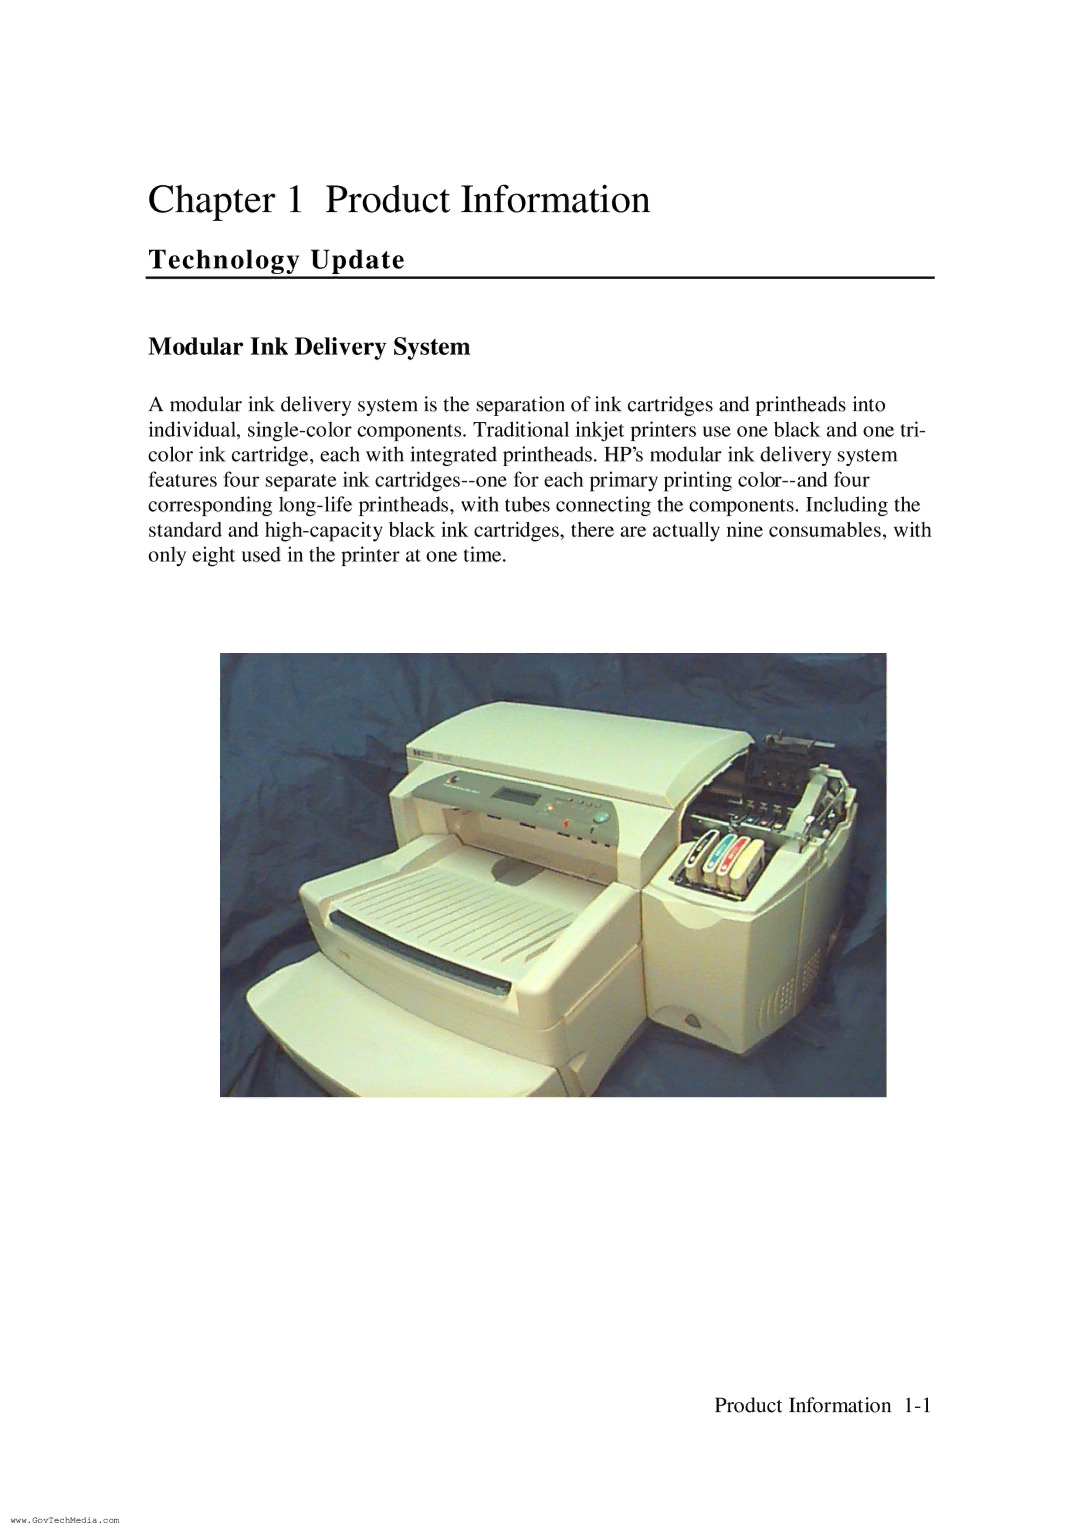 HP ColorPro CAD manual Technology Update, Modular Ink Delivery System 